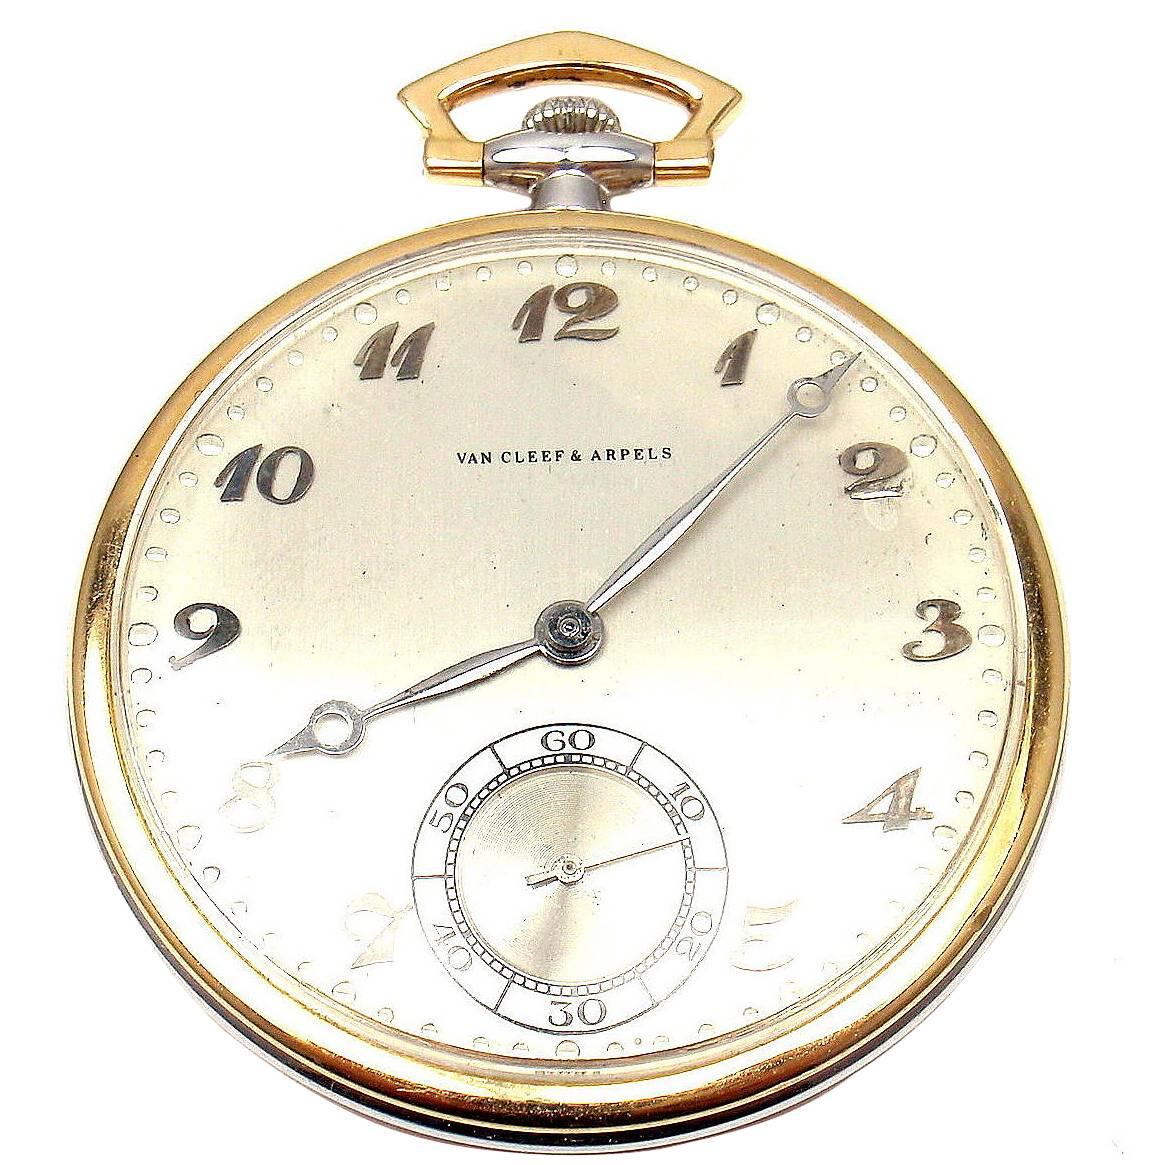 Van Cleef & Arpels Tissot Yellow and White Gold Pocket Watch